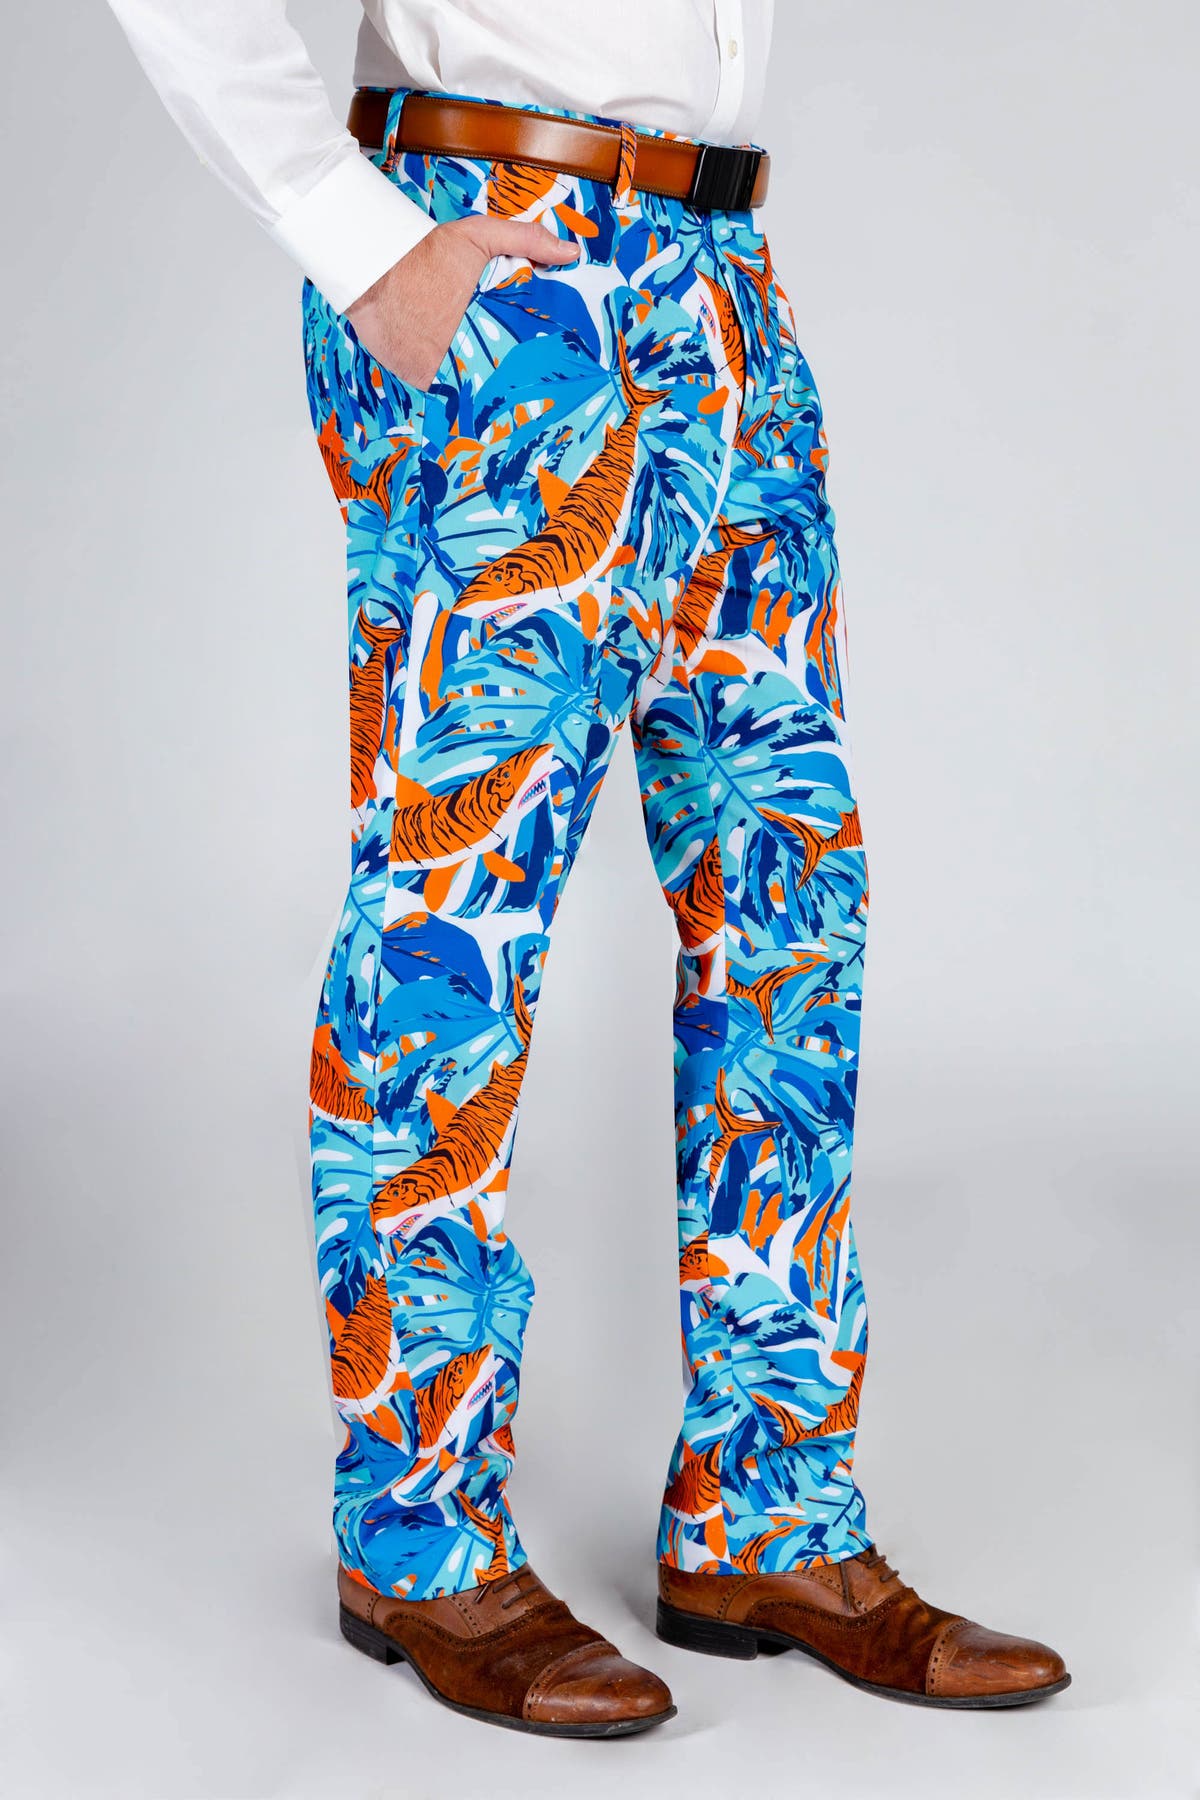 Tiger Shark Party Pants | The Literalist